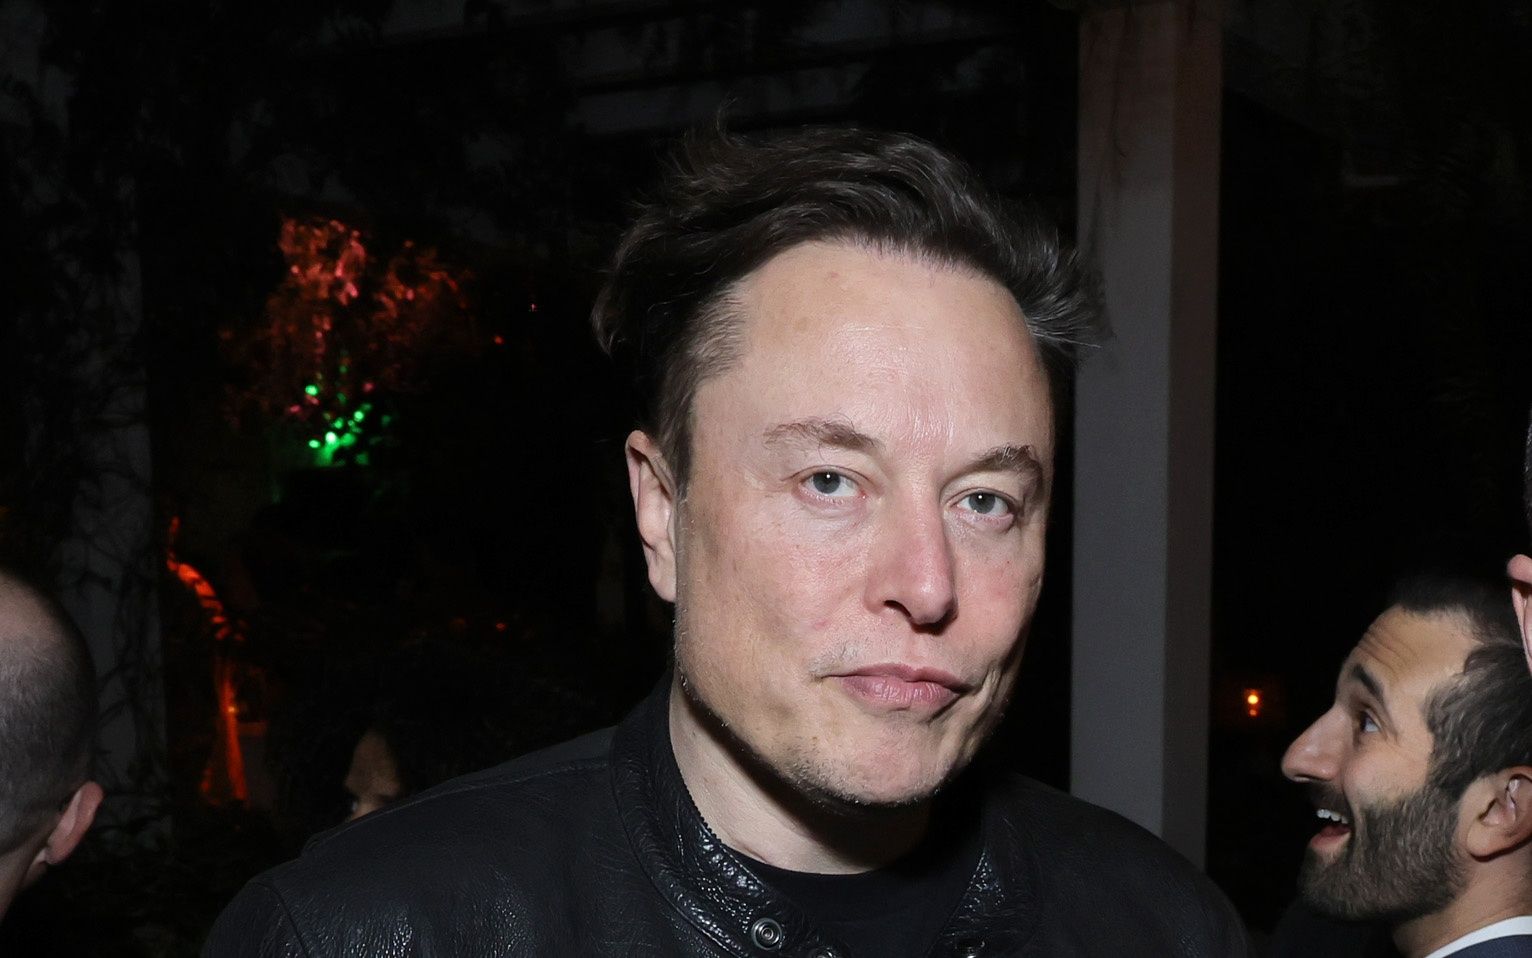 Elon Musk turned down working with Bill Gates over Tesla stocks